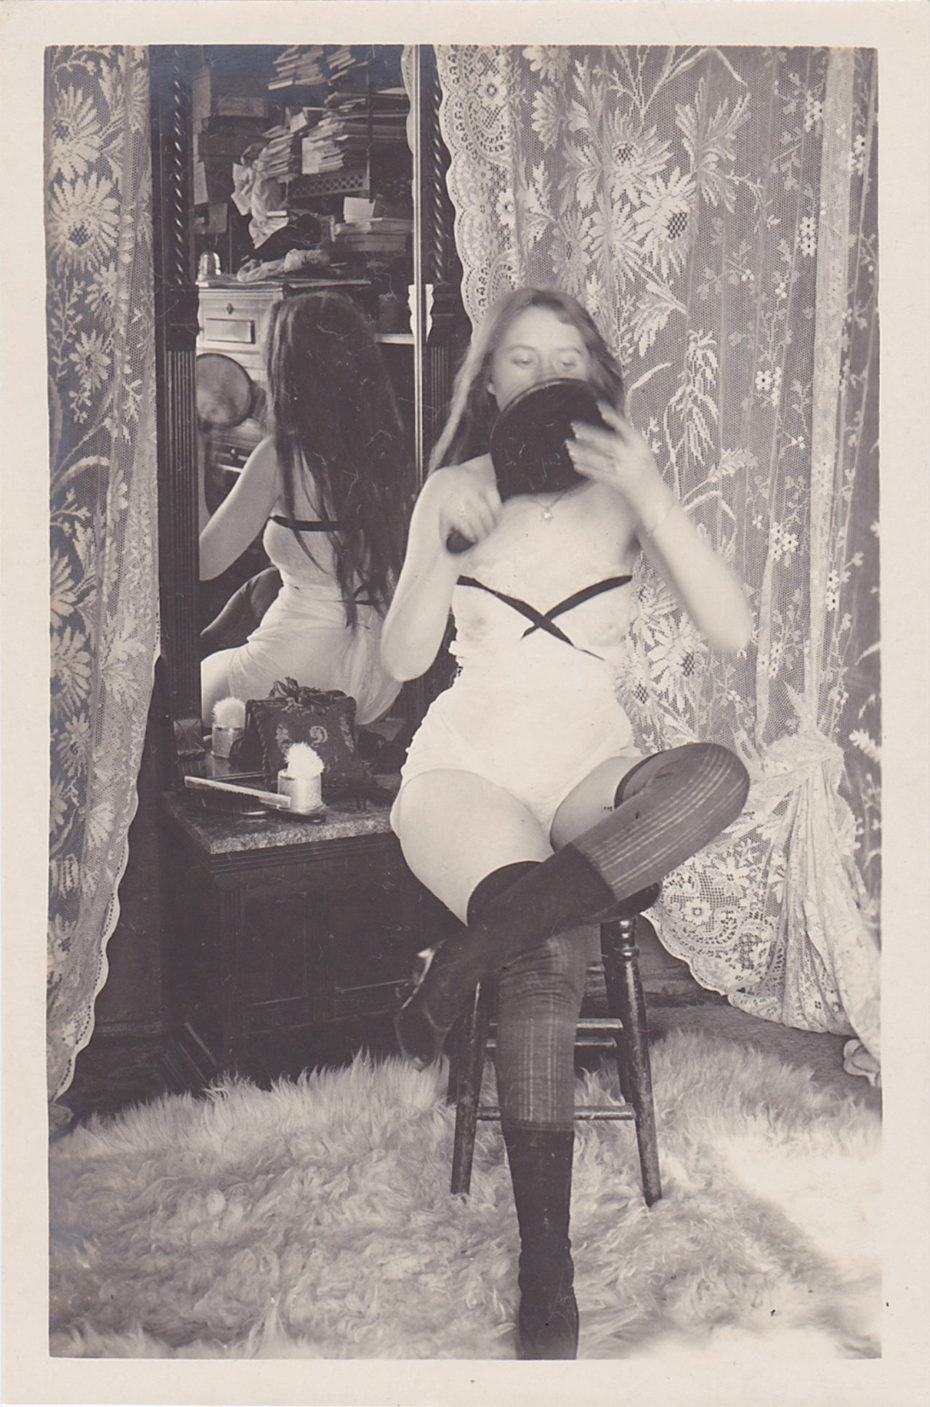 Secretly Documenting the Intimate World of 19th Century Sex Workers